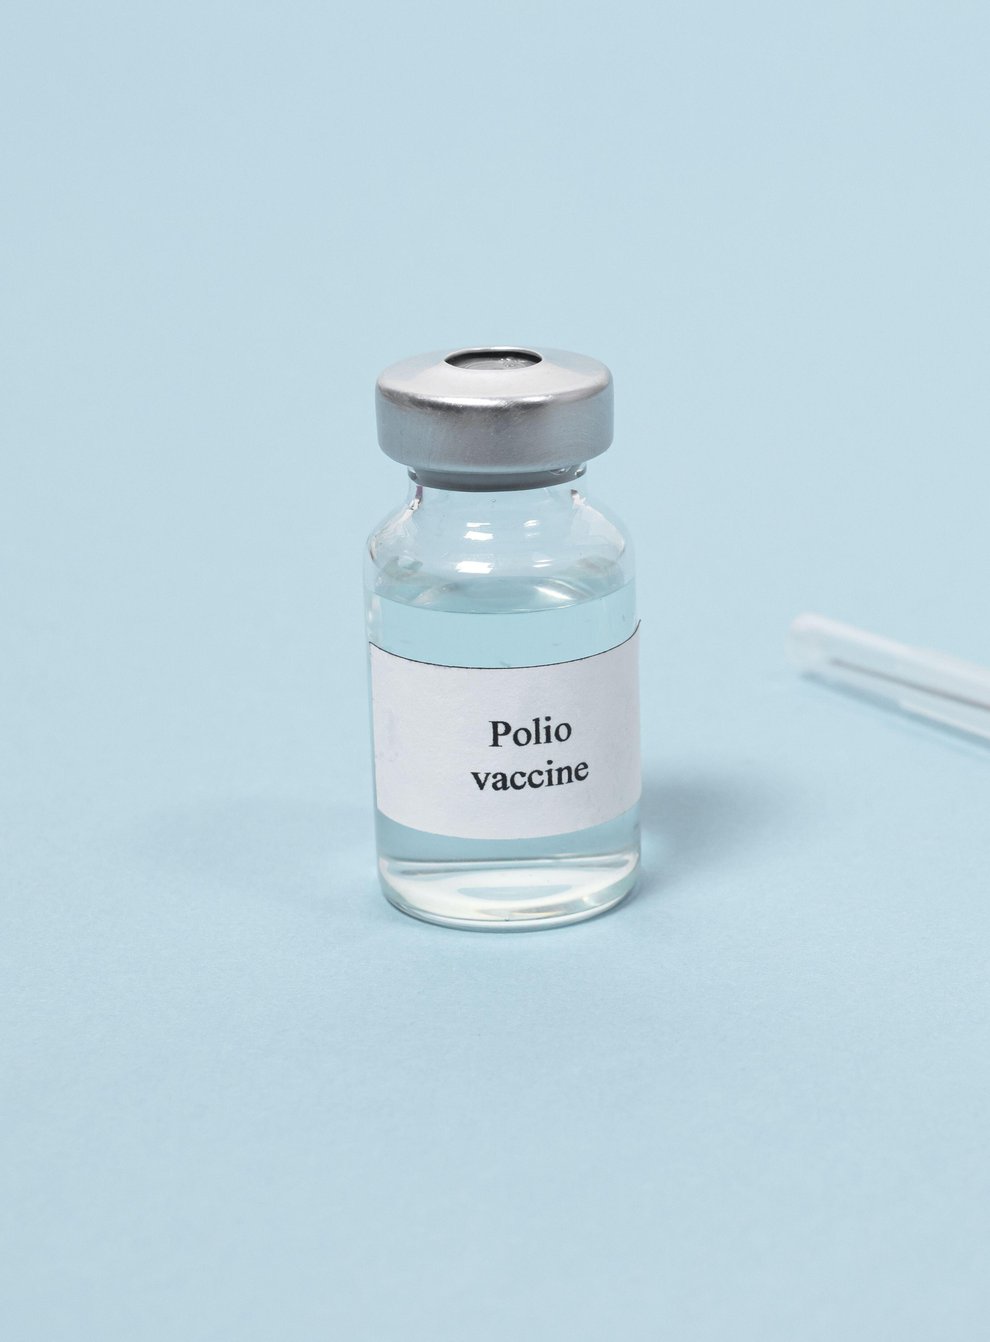 An outbreak of polio has been detected in the UK, with people urged to get their vaccines (Alamy/PA)